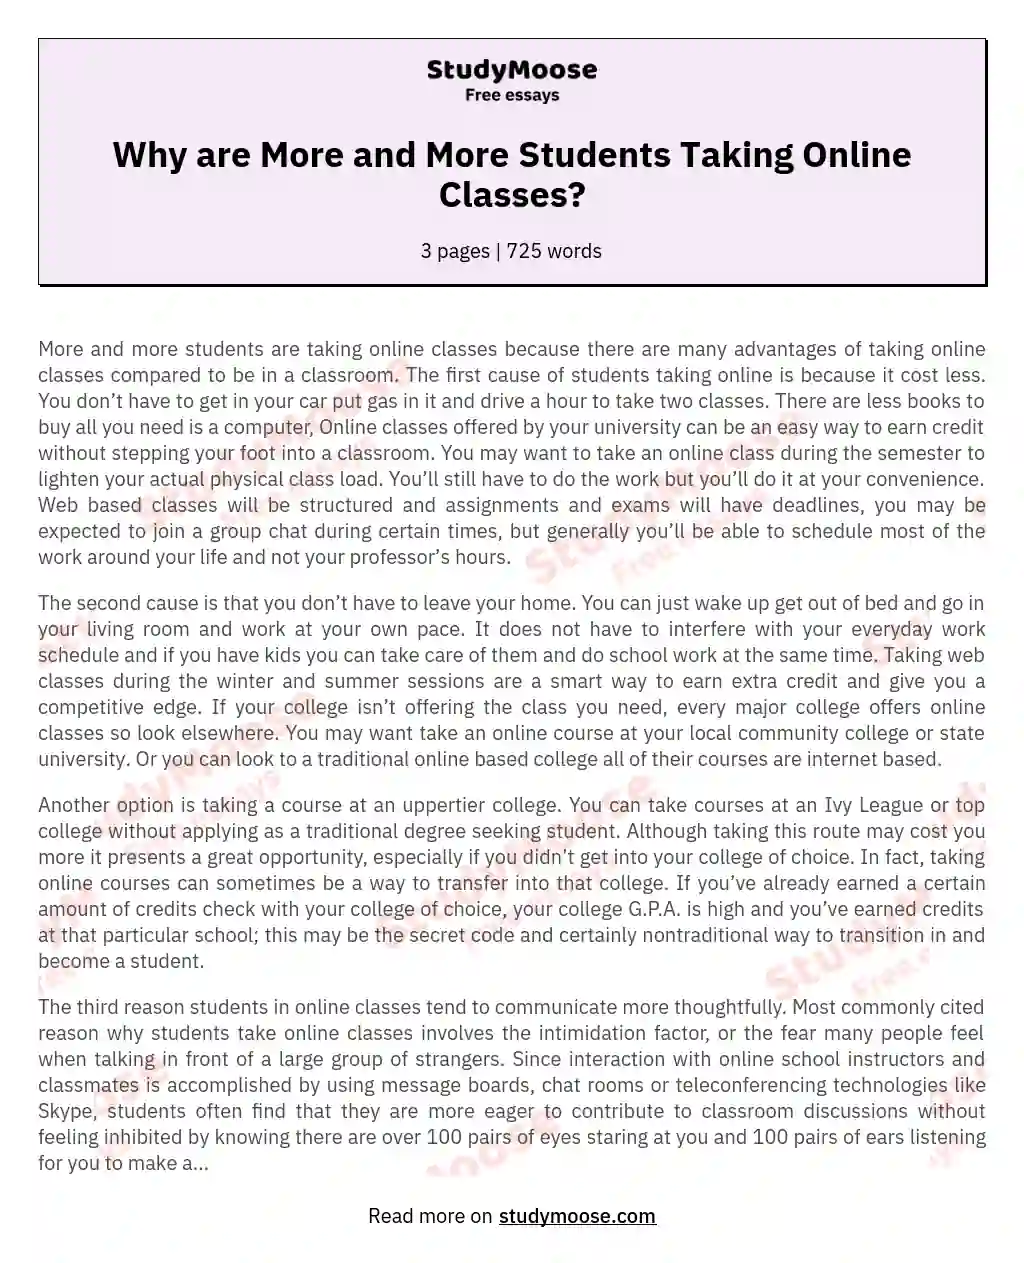 Why are More and More Students Taking Online Classes? essay